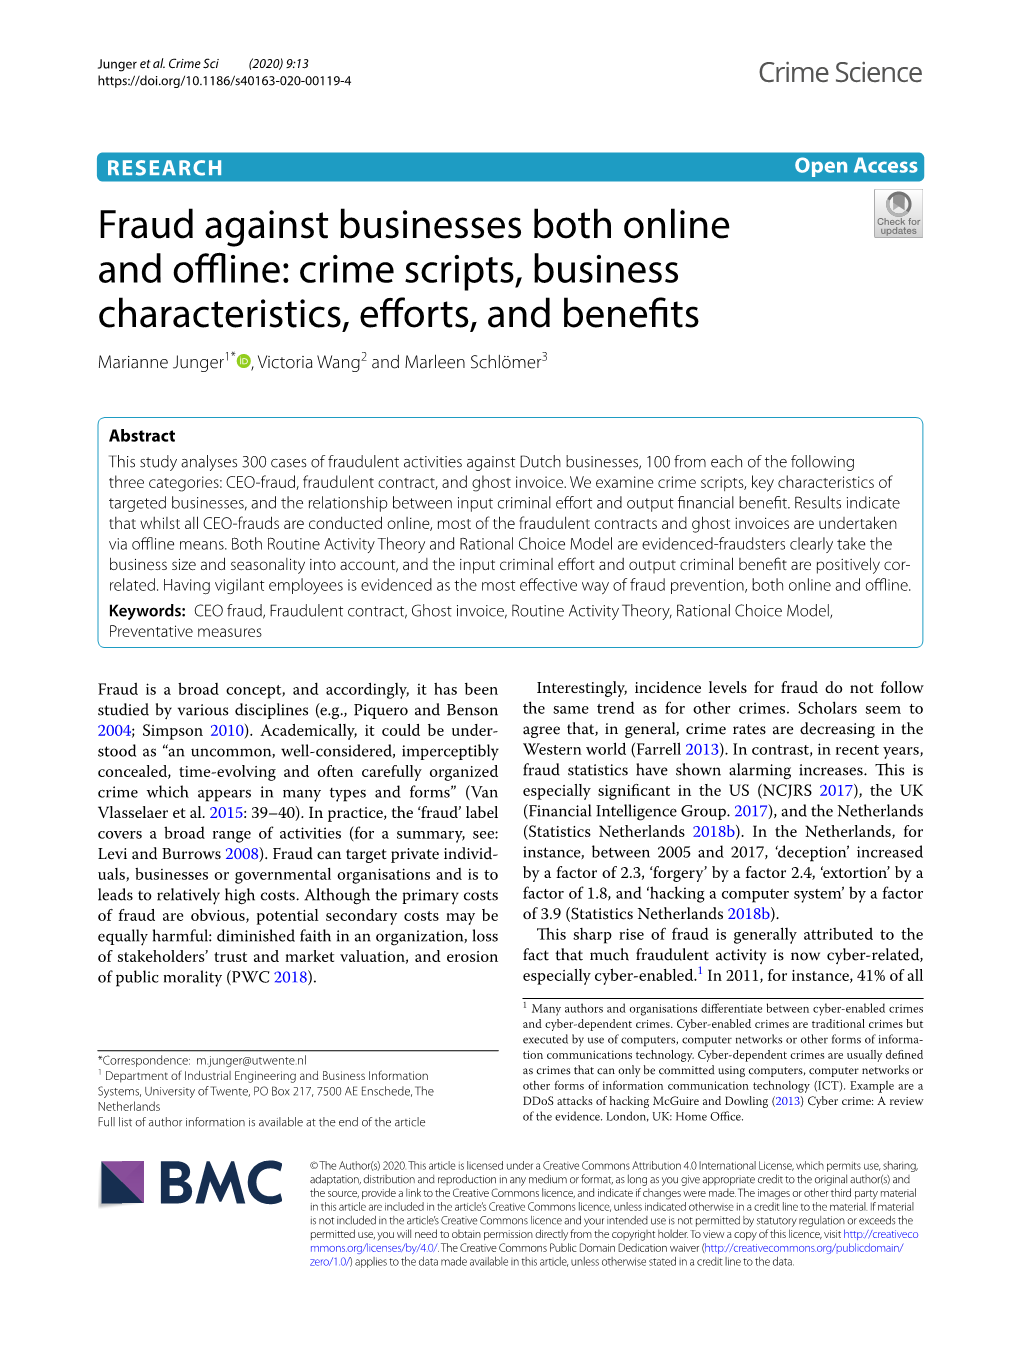 Fraud Against Businesses Both Online and Offline